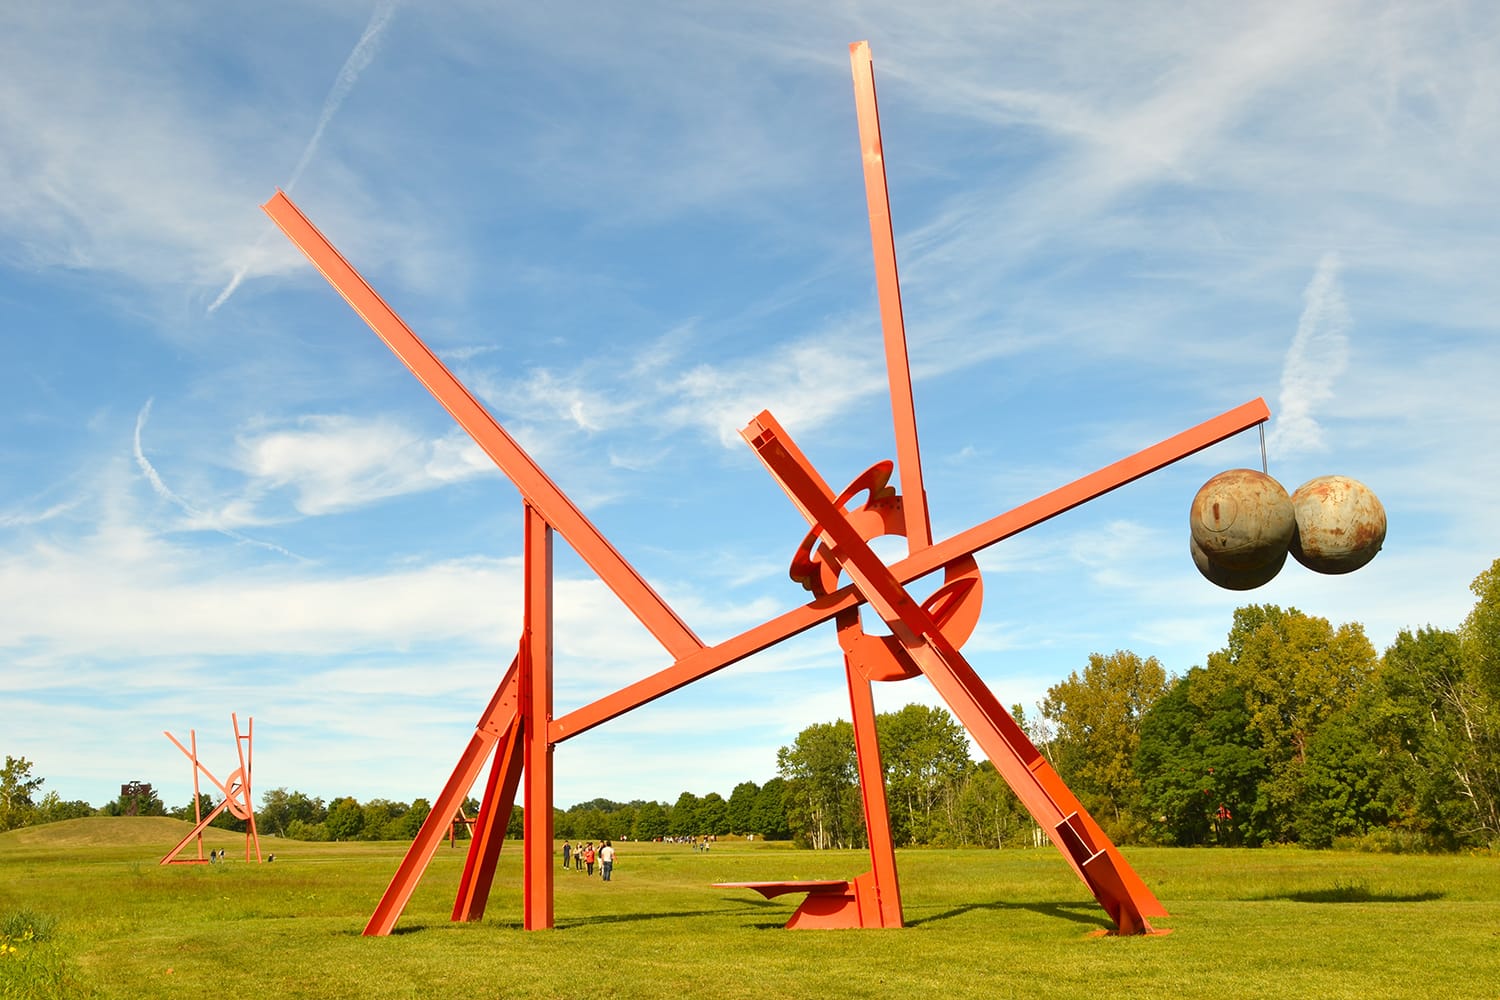 Sculpture at the Storm King Art Center in Mountainville, NY, USA